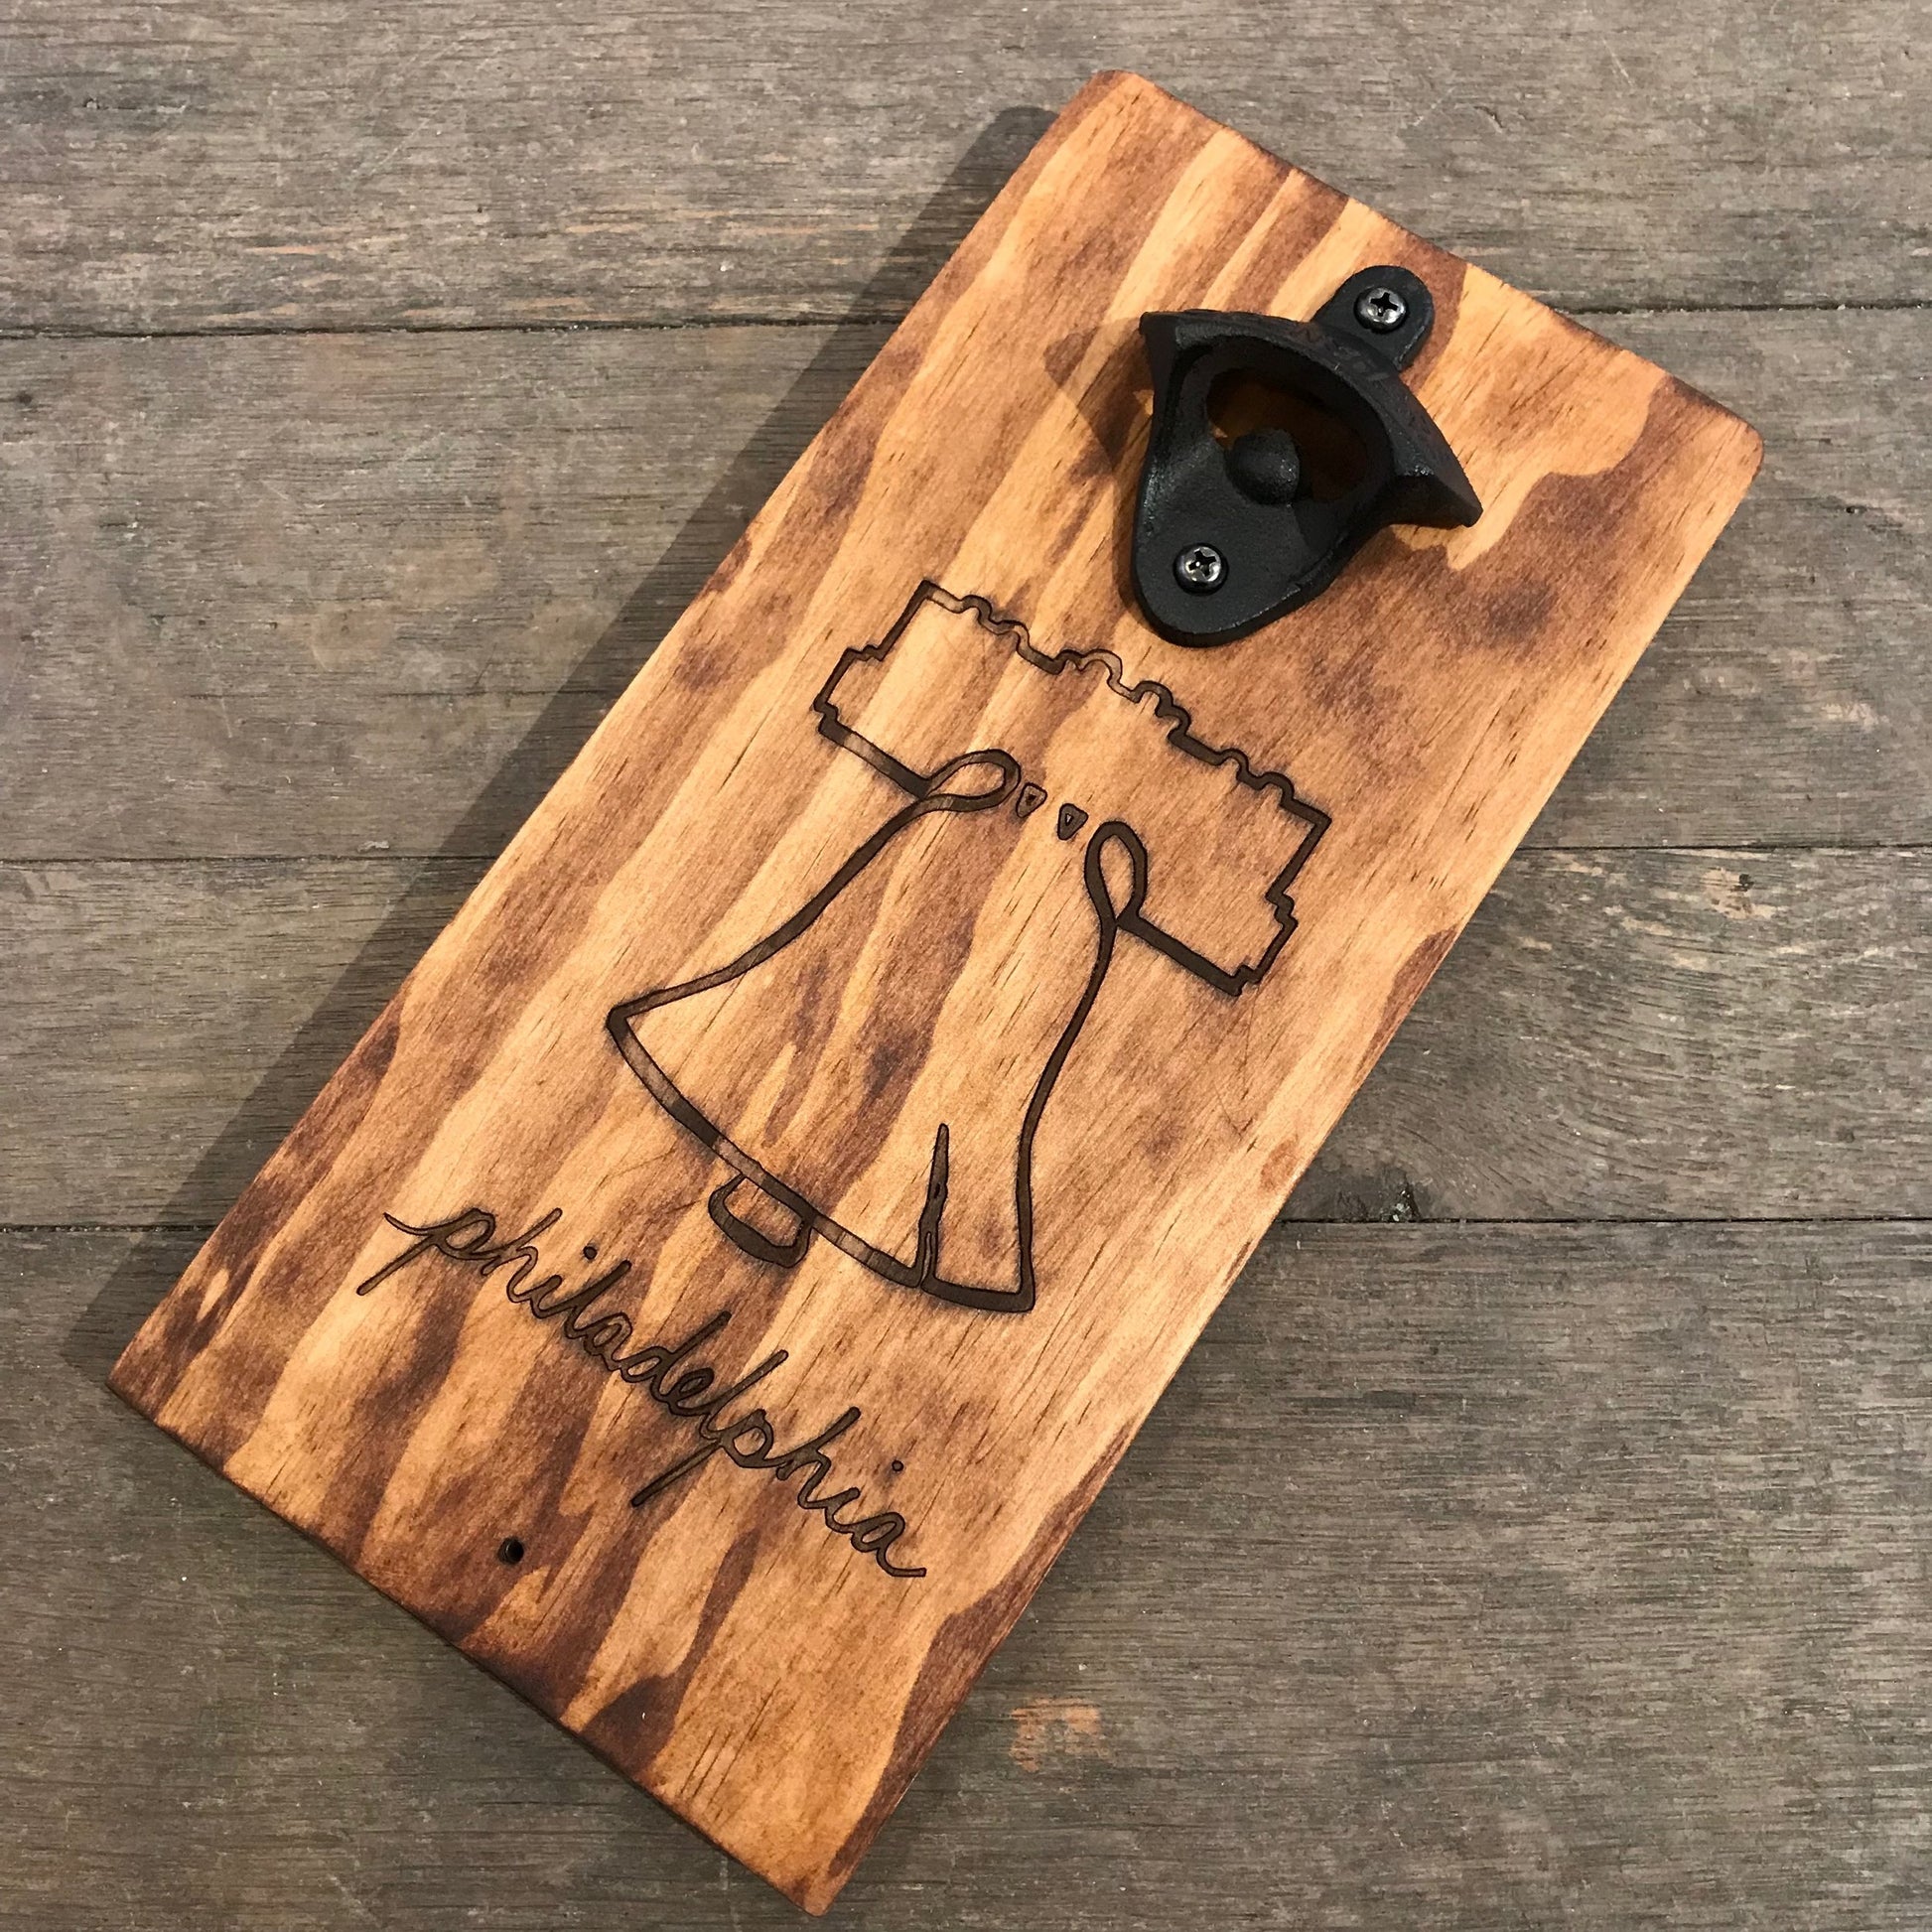 A Philly Wall-Mounted Bottle Opener with a laser-etched image of the Liberty Bell and "Philadelphia" text, mounted on a rustic wood plank, from Philly Phlights.